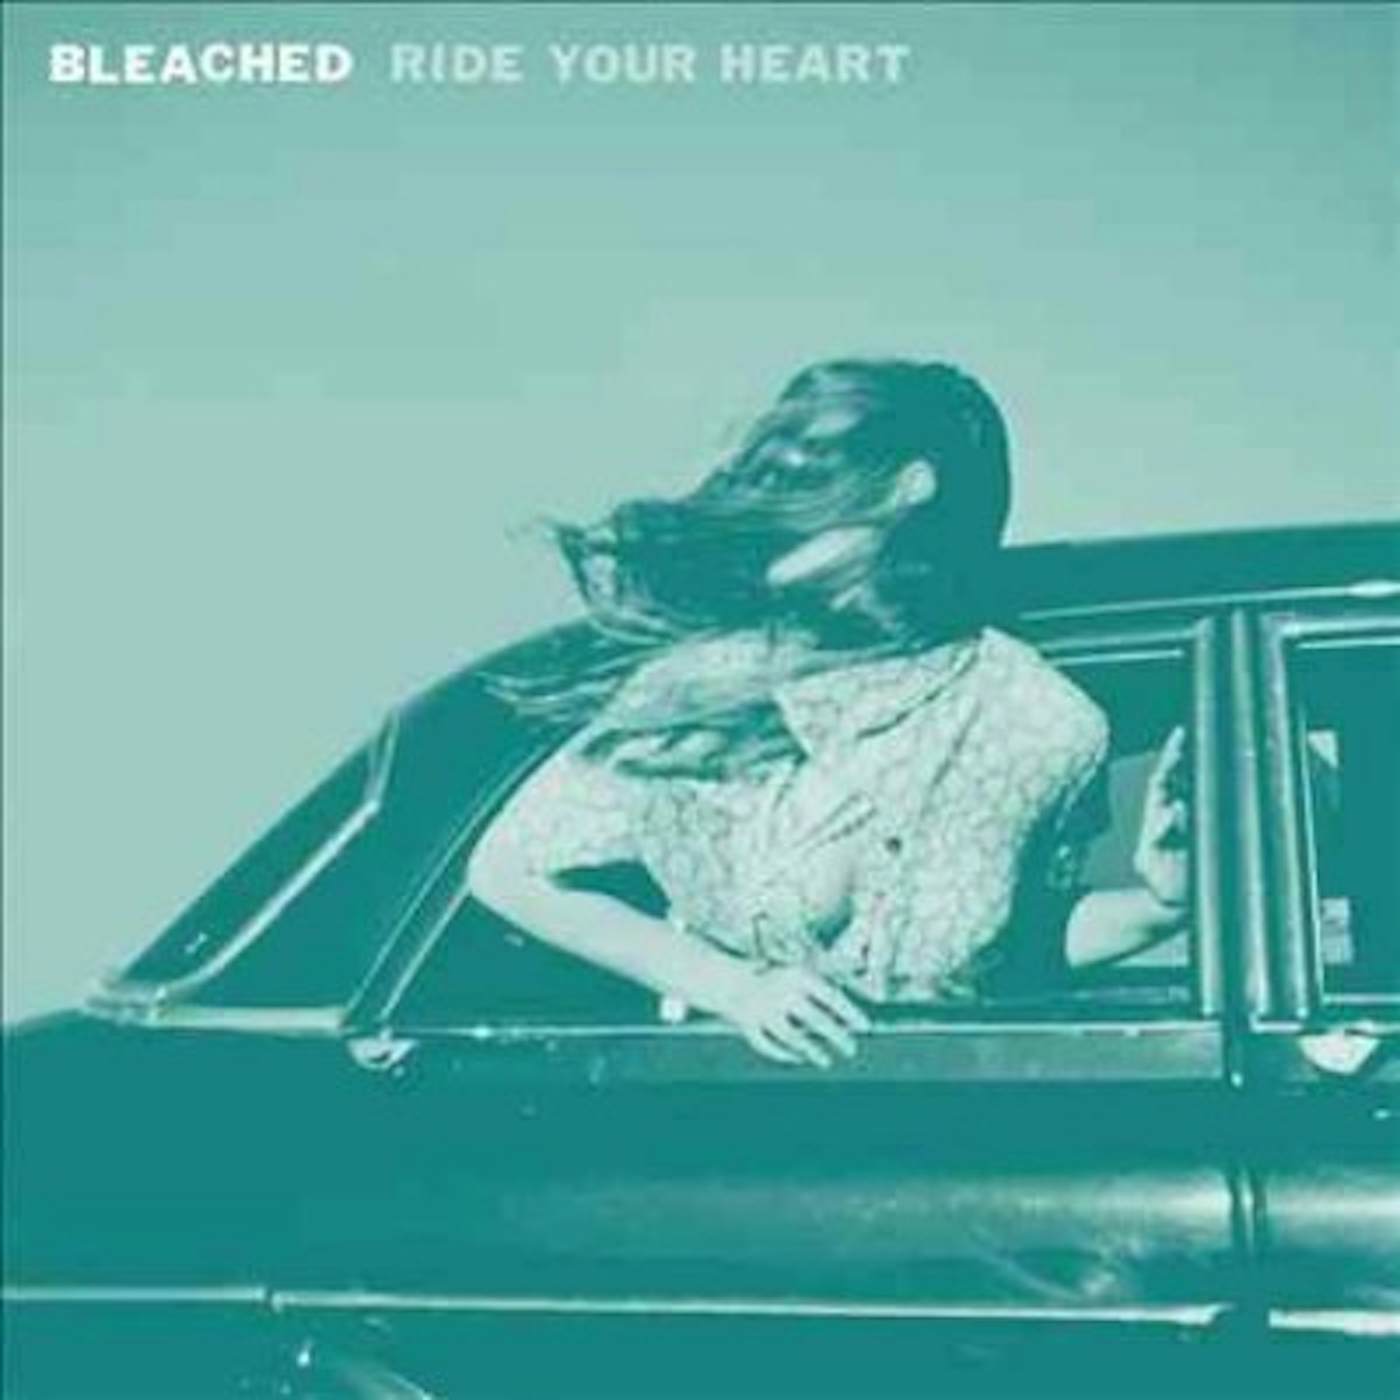 Bleached RIDE YOUR HEART Vinyl Record